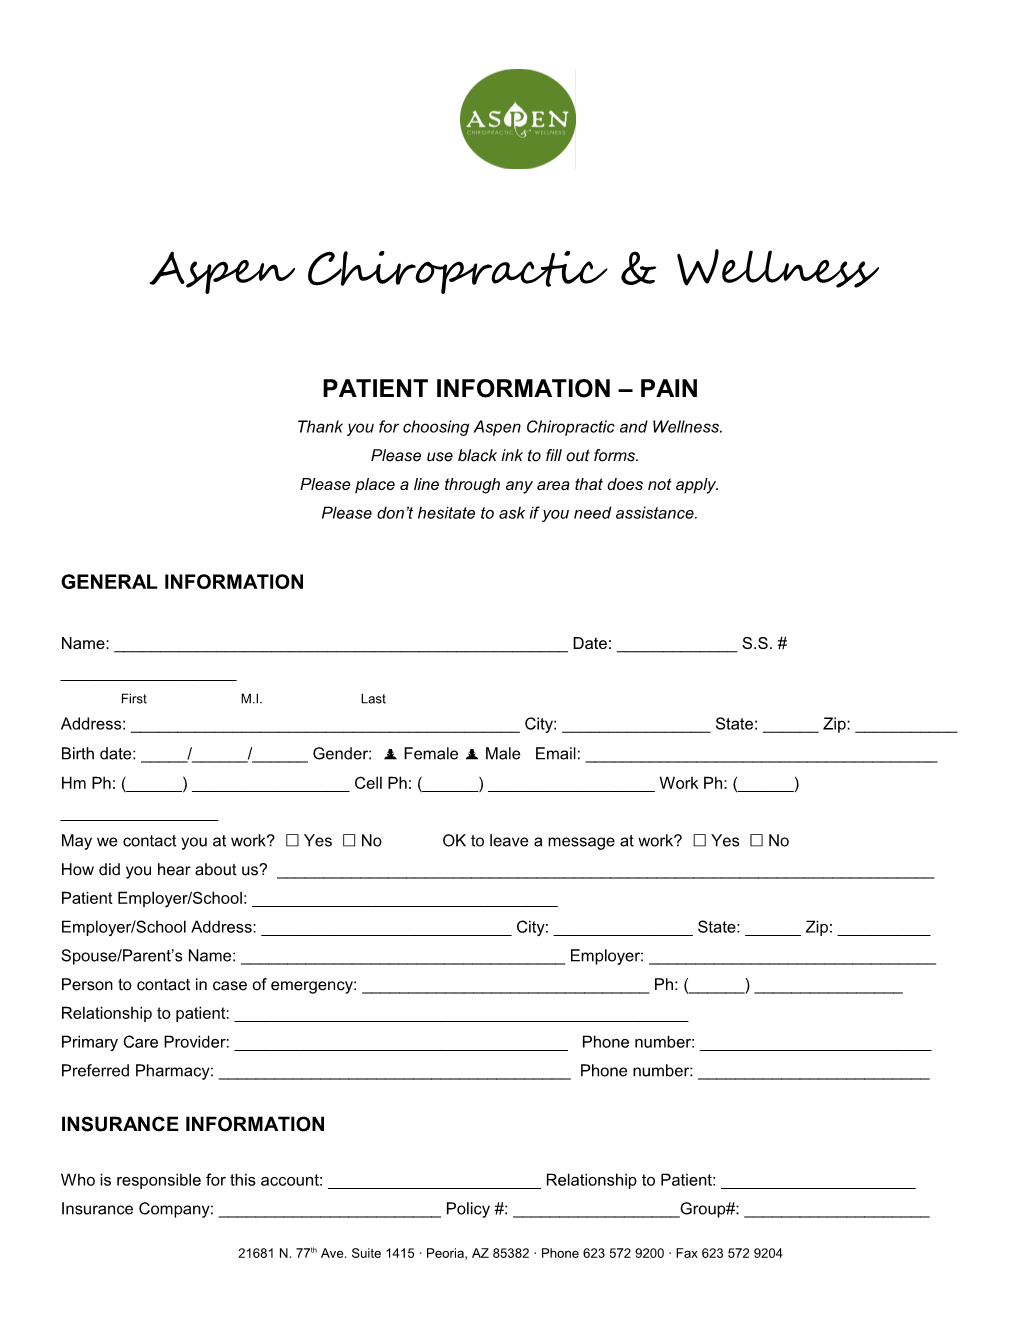 Thank You for Choosing Aspen Chiropractic and Wellness